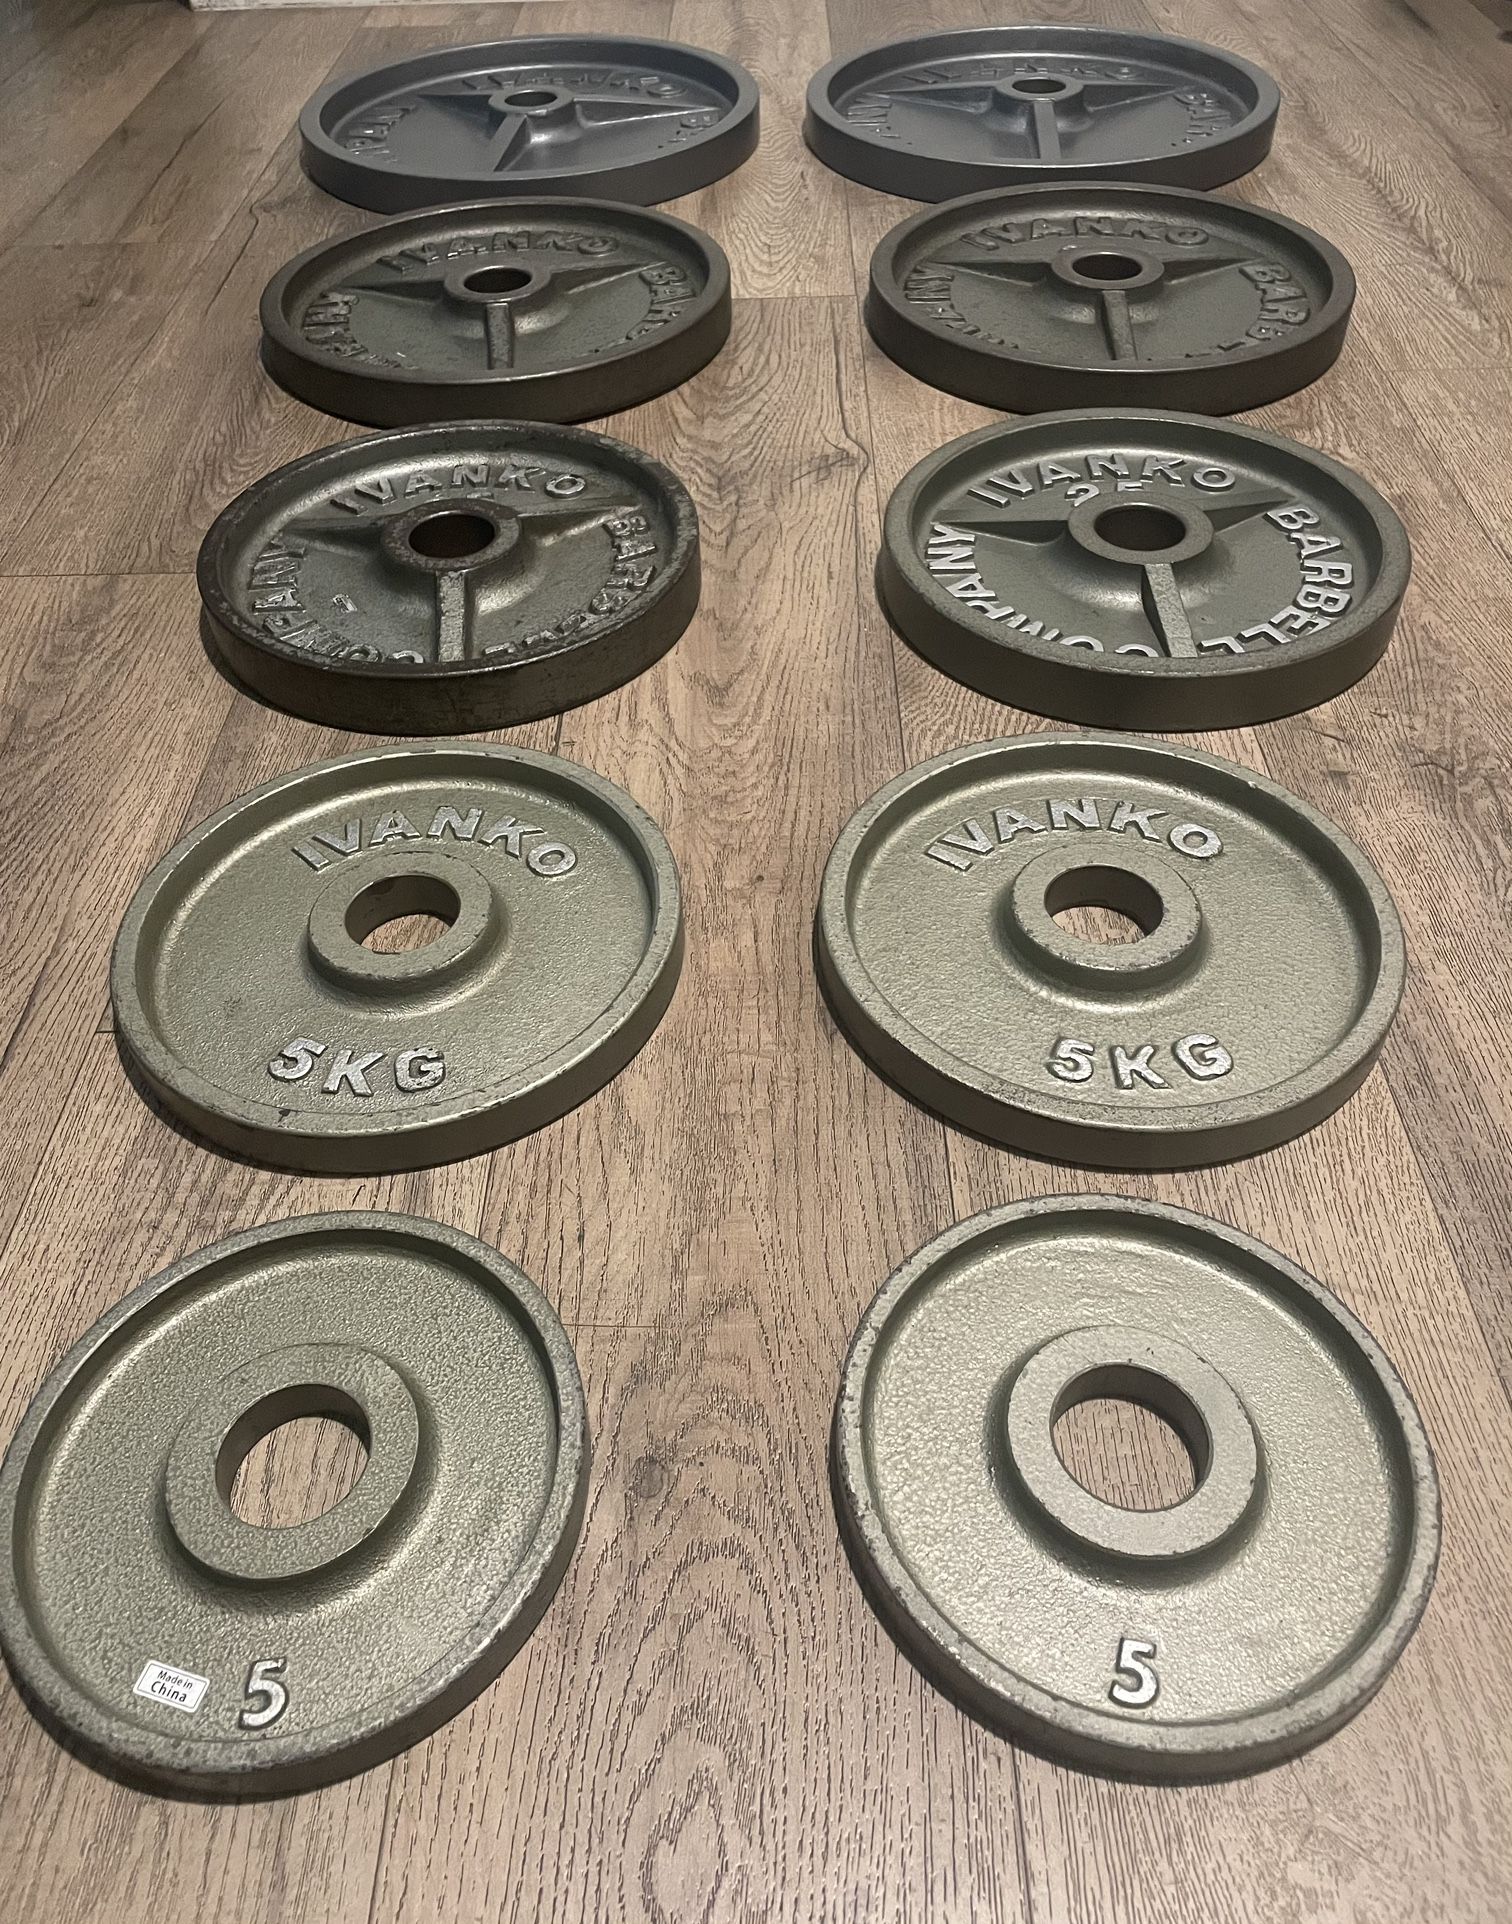 IVANKO FULL SET [Classic Olympic “M” Series] Of Weight Plates; Total: 242 lb